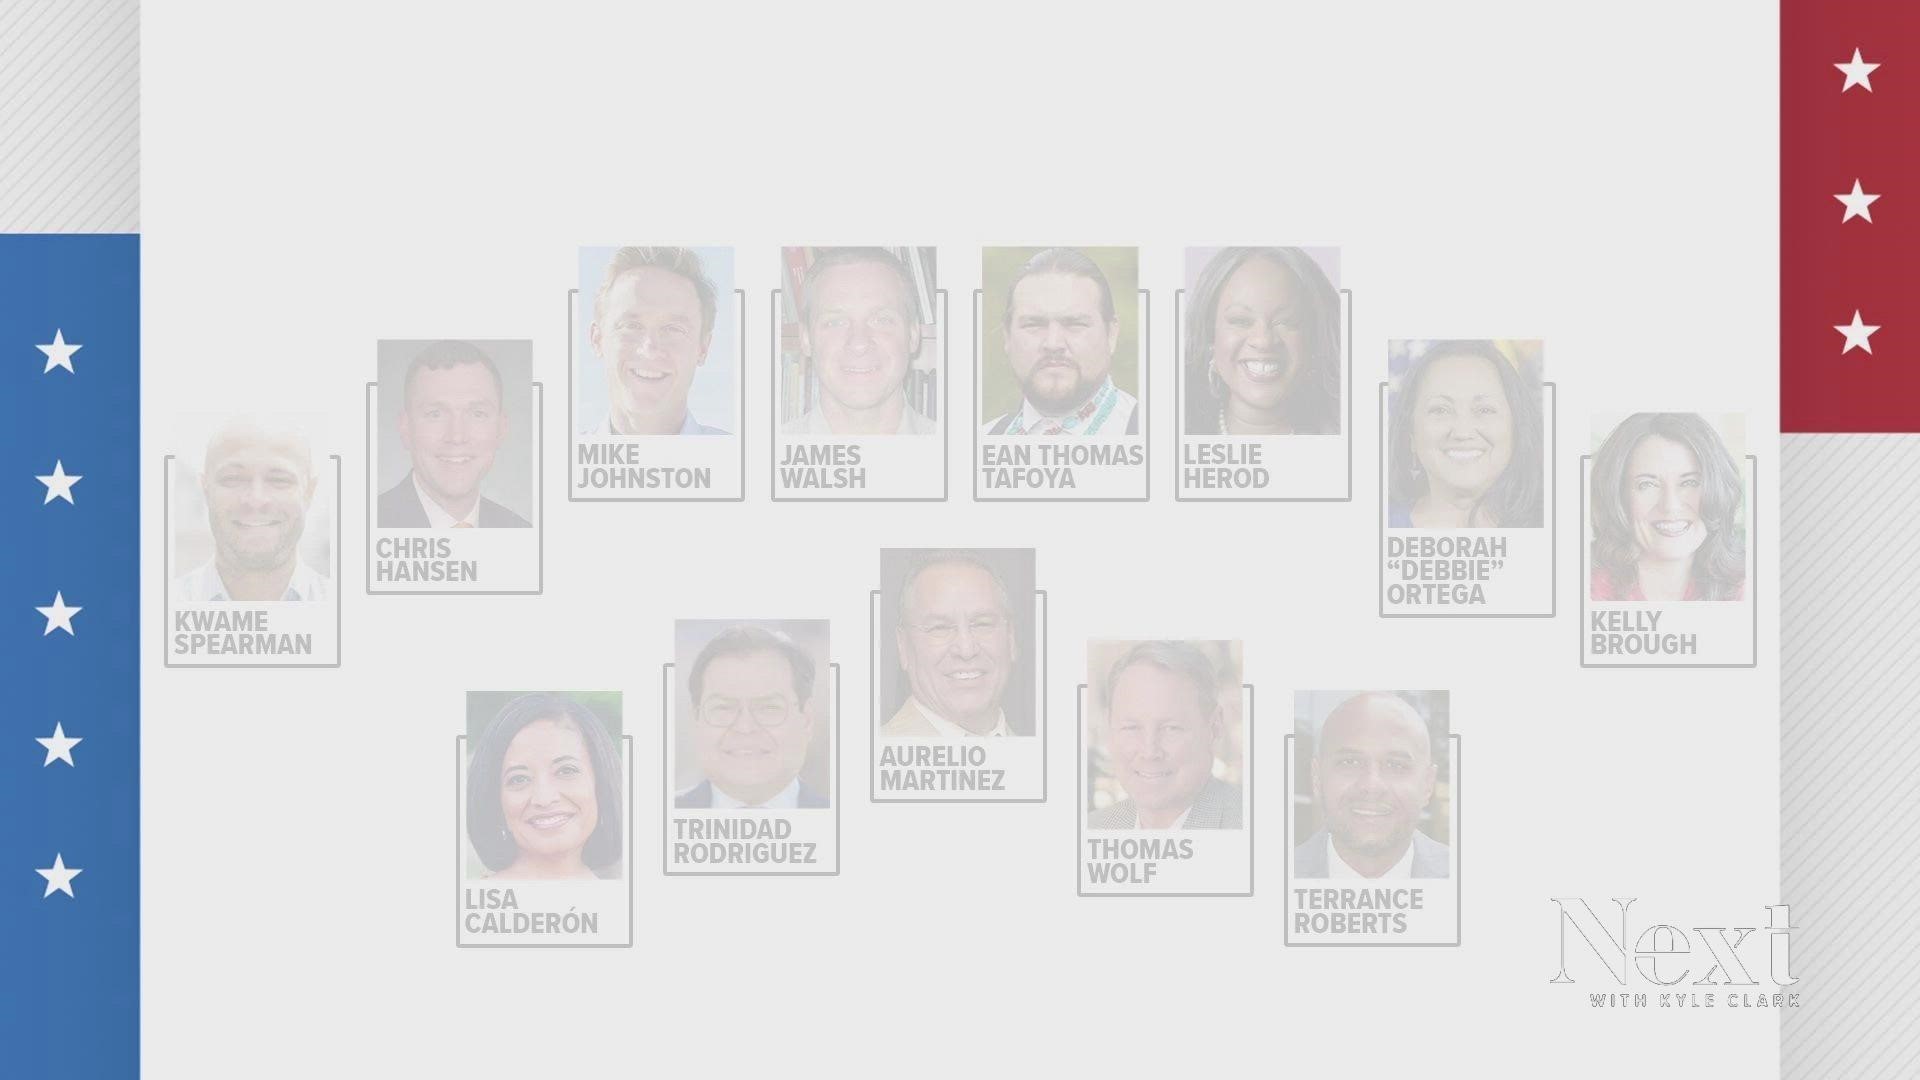 Got a minute? Because it'll take a minute or two to learn a thing or two about the candidates for Denver mayor.